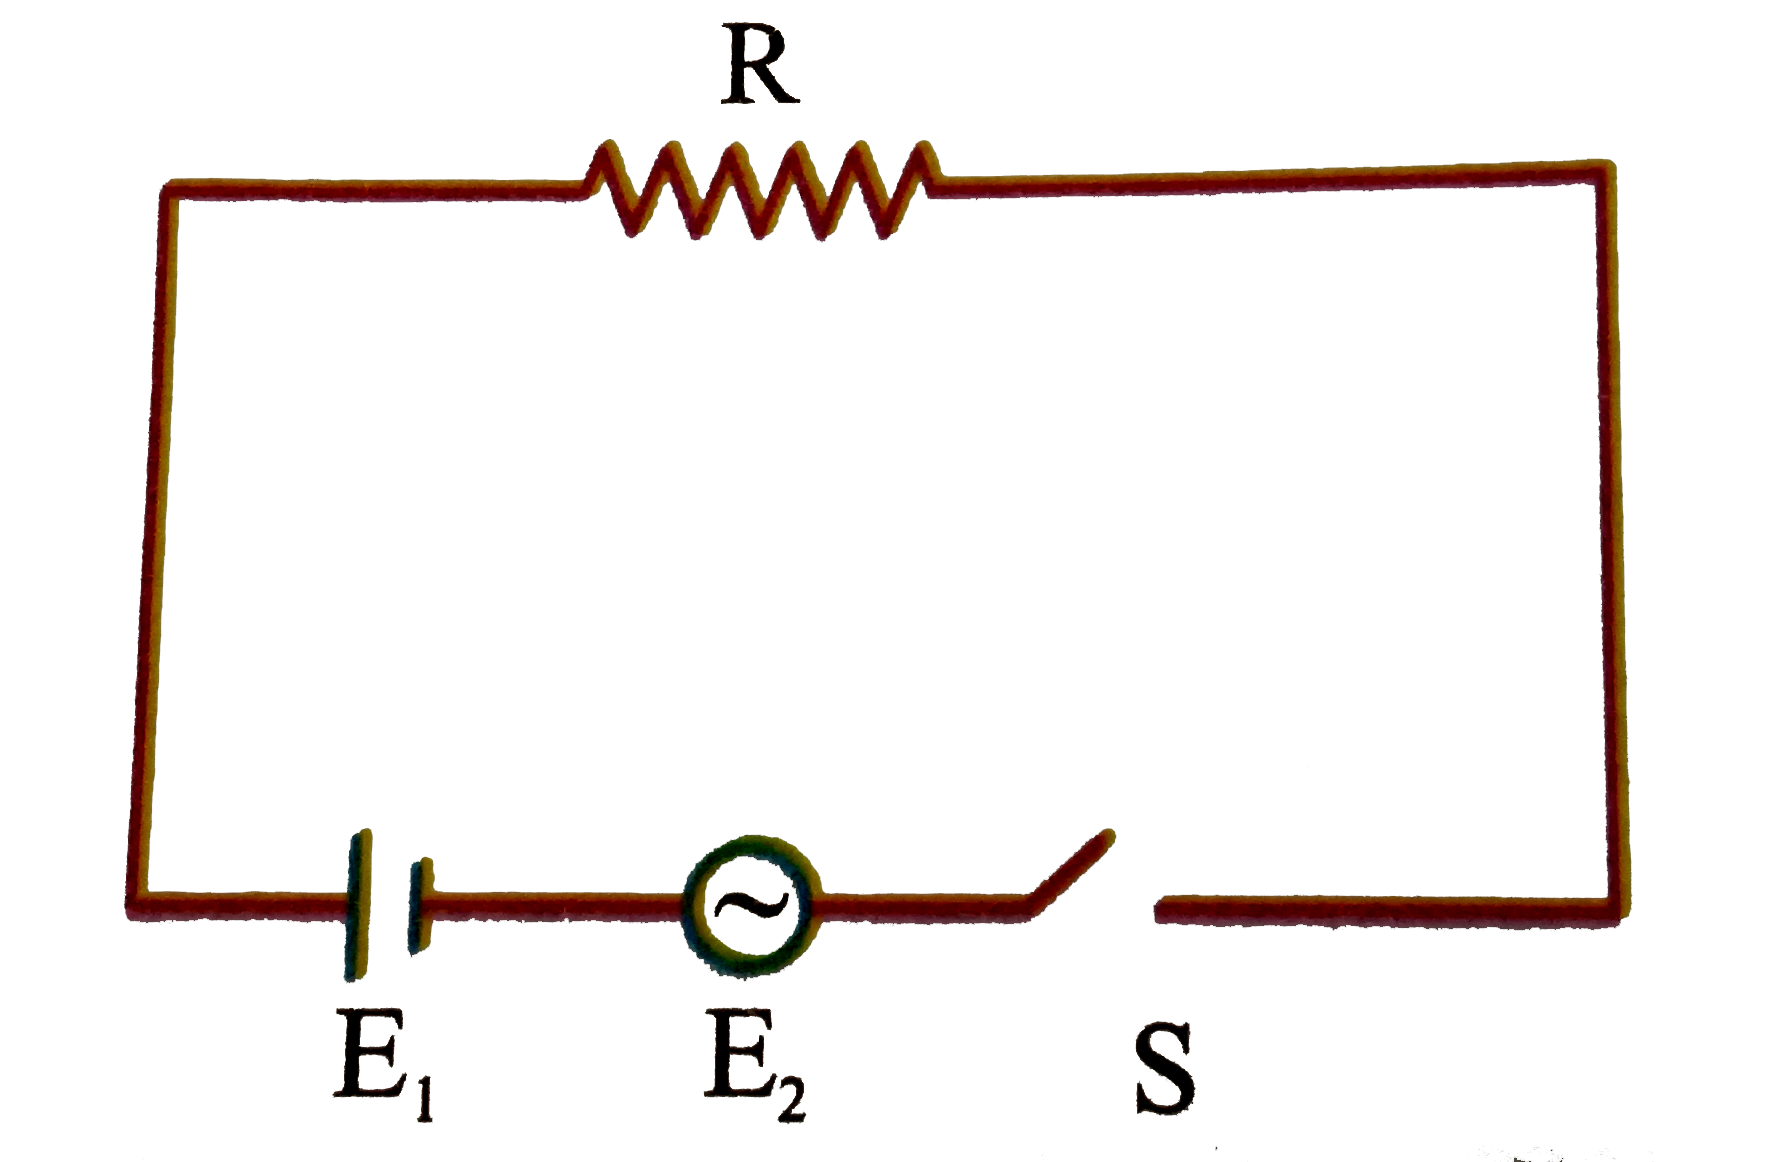 In the circuit shown in the figure R = 50 Omega, E(1) = 25 sqrt(3) volt and E(2) = 25 sqrt(6) sin omega t volt where omega = 100 pi s^(-1). The switch is closed at time t = 0 and remains closed for 14 minutes, then it is opened.   Find the amount of heat produced in the resistor